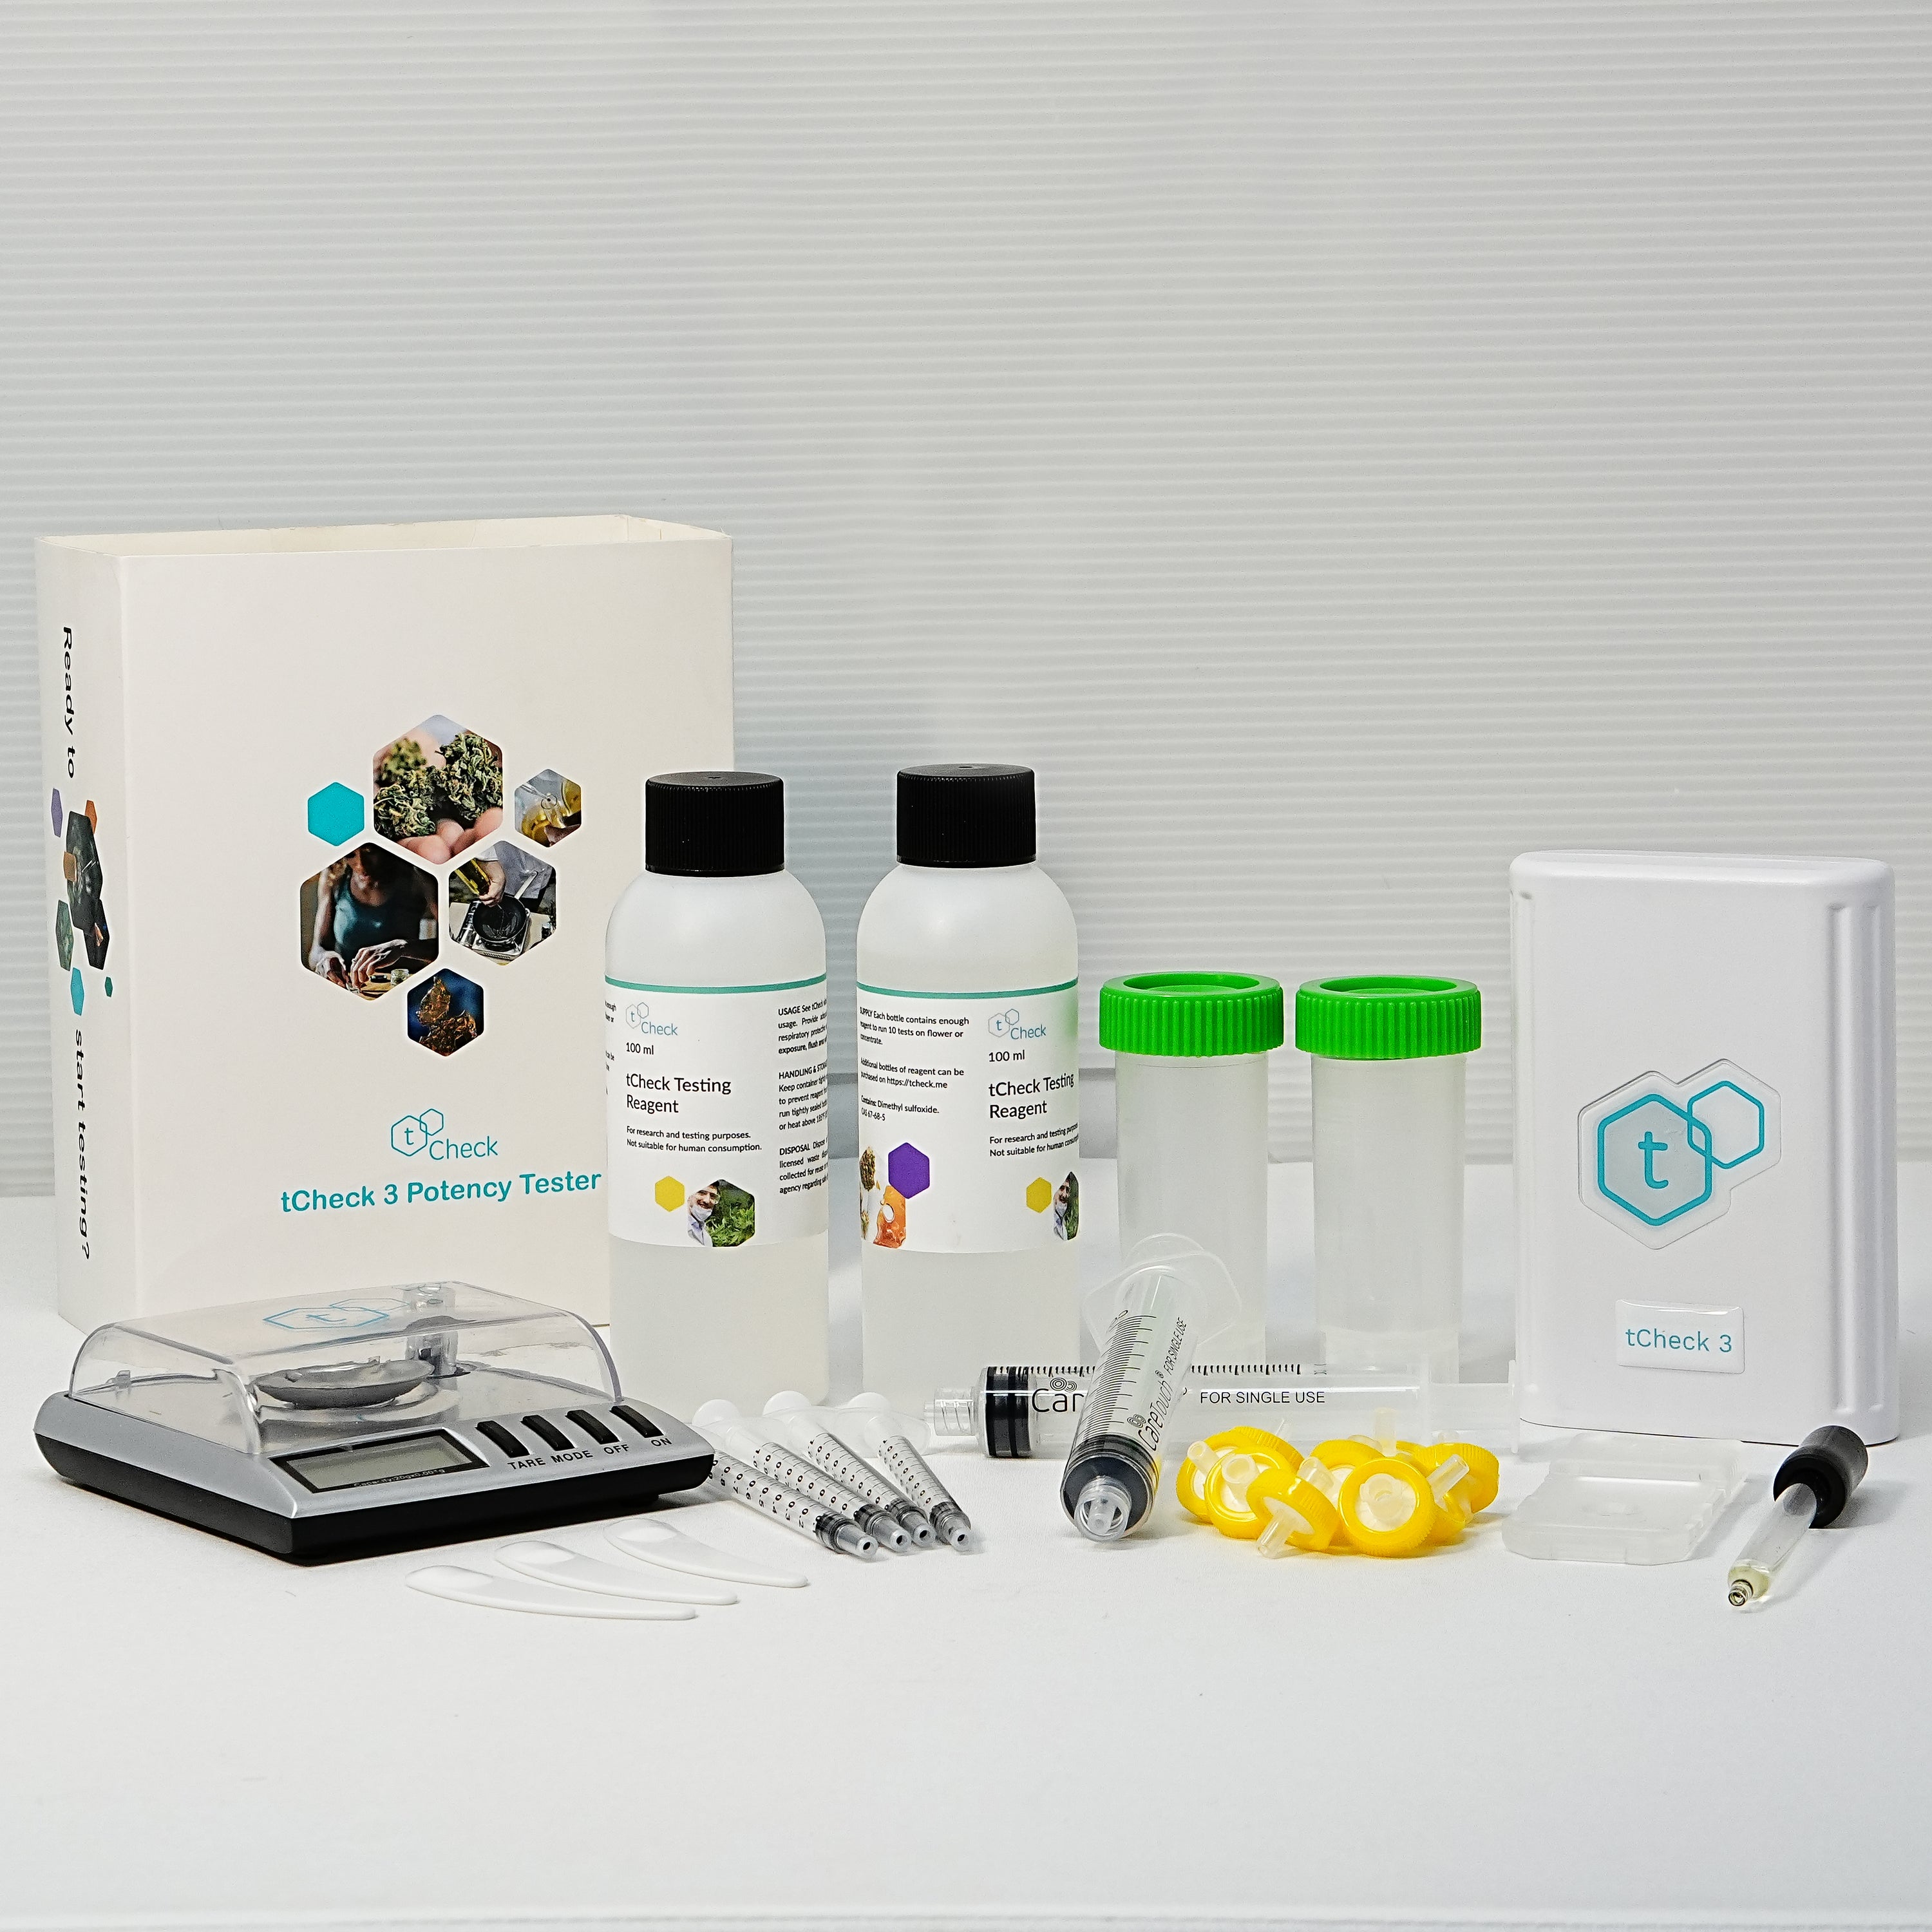 tCheck 3 THC Potency Tester with Flower Testing Expansion Kit | White